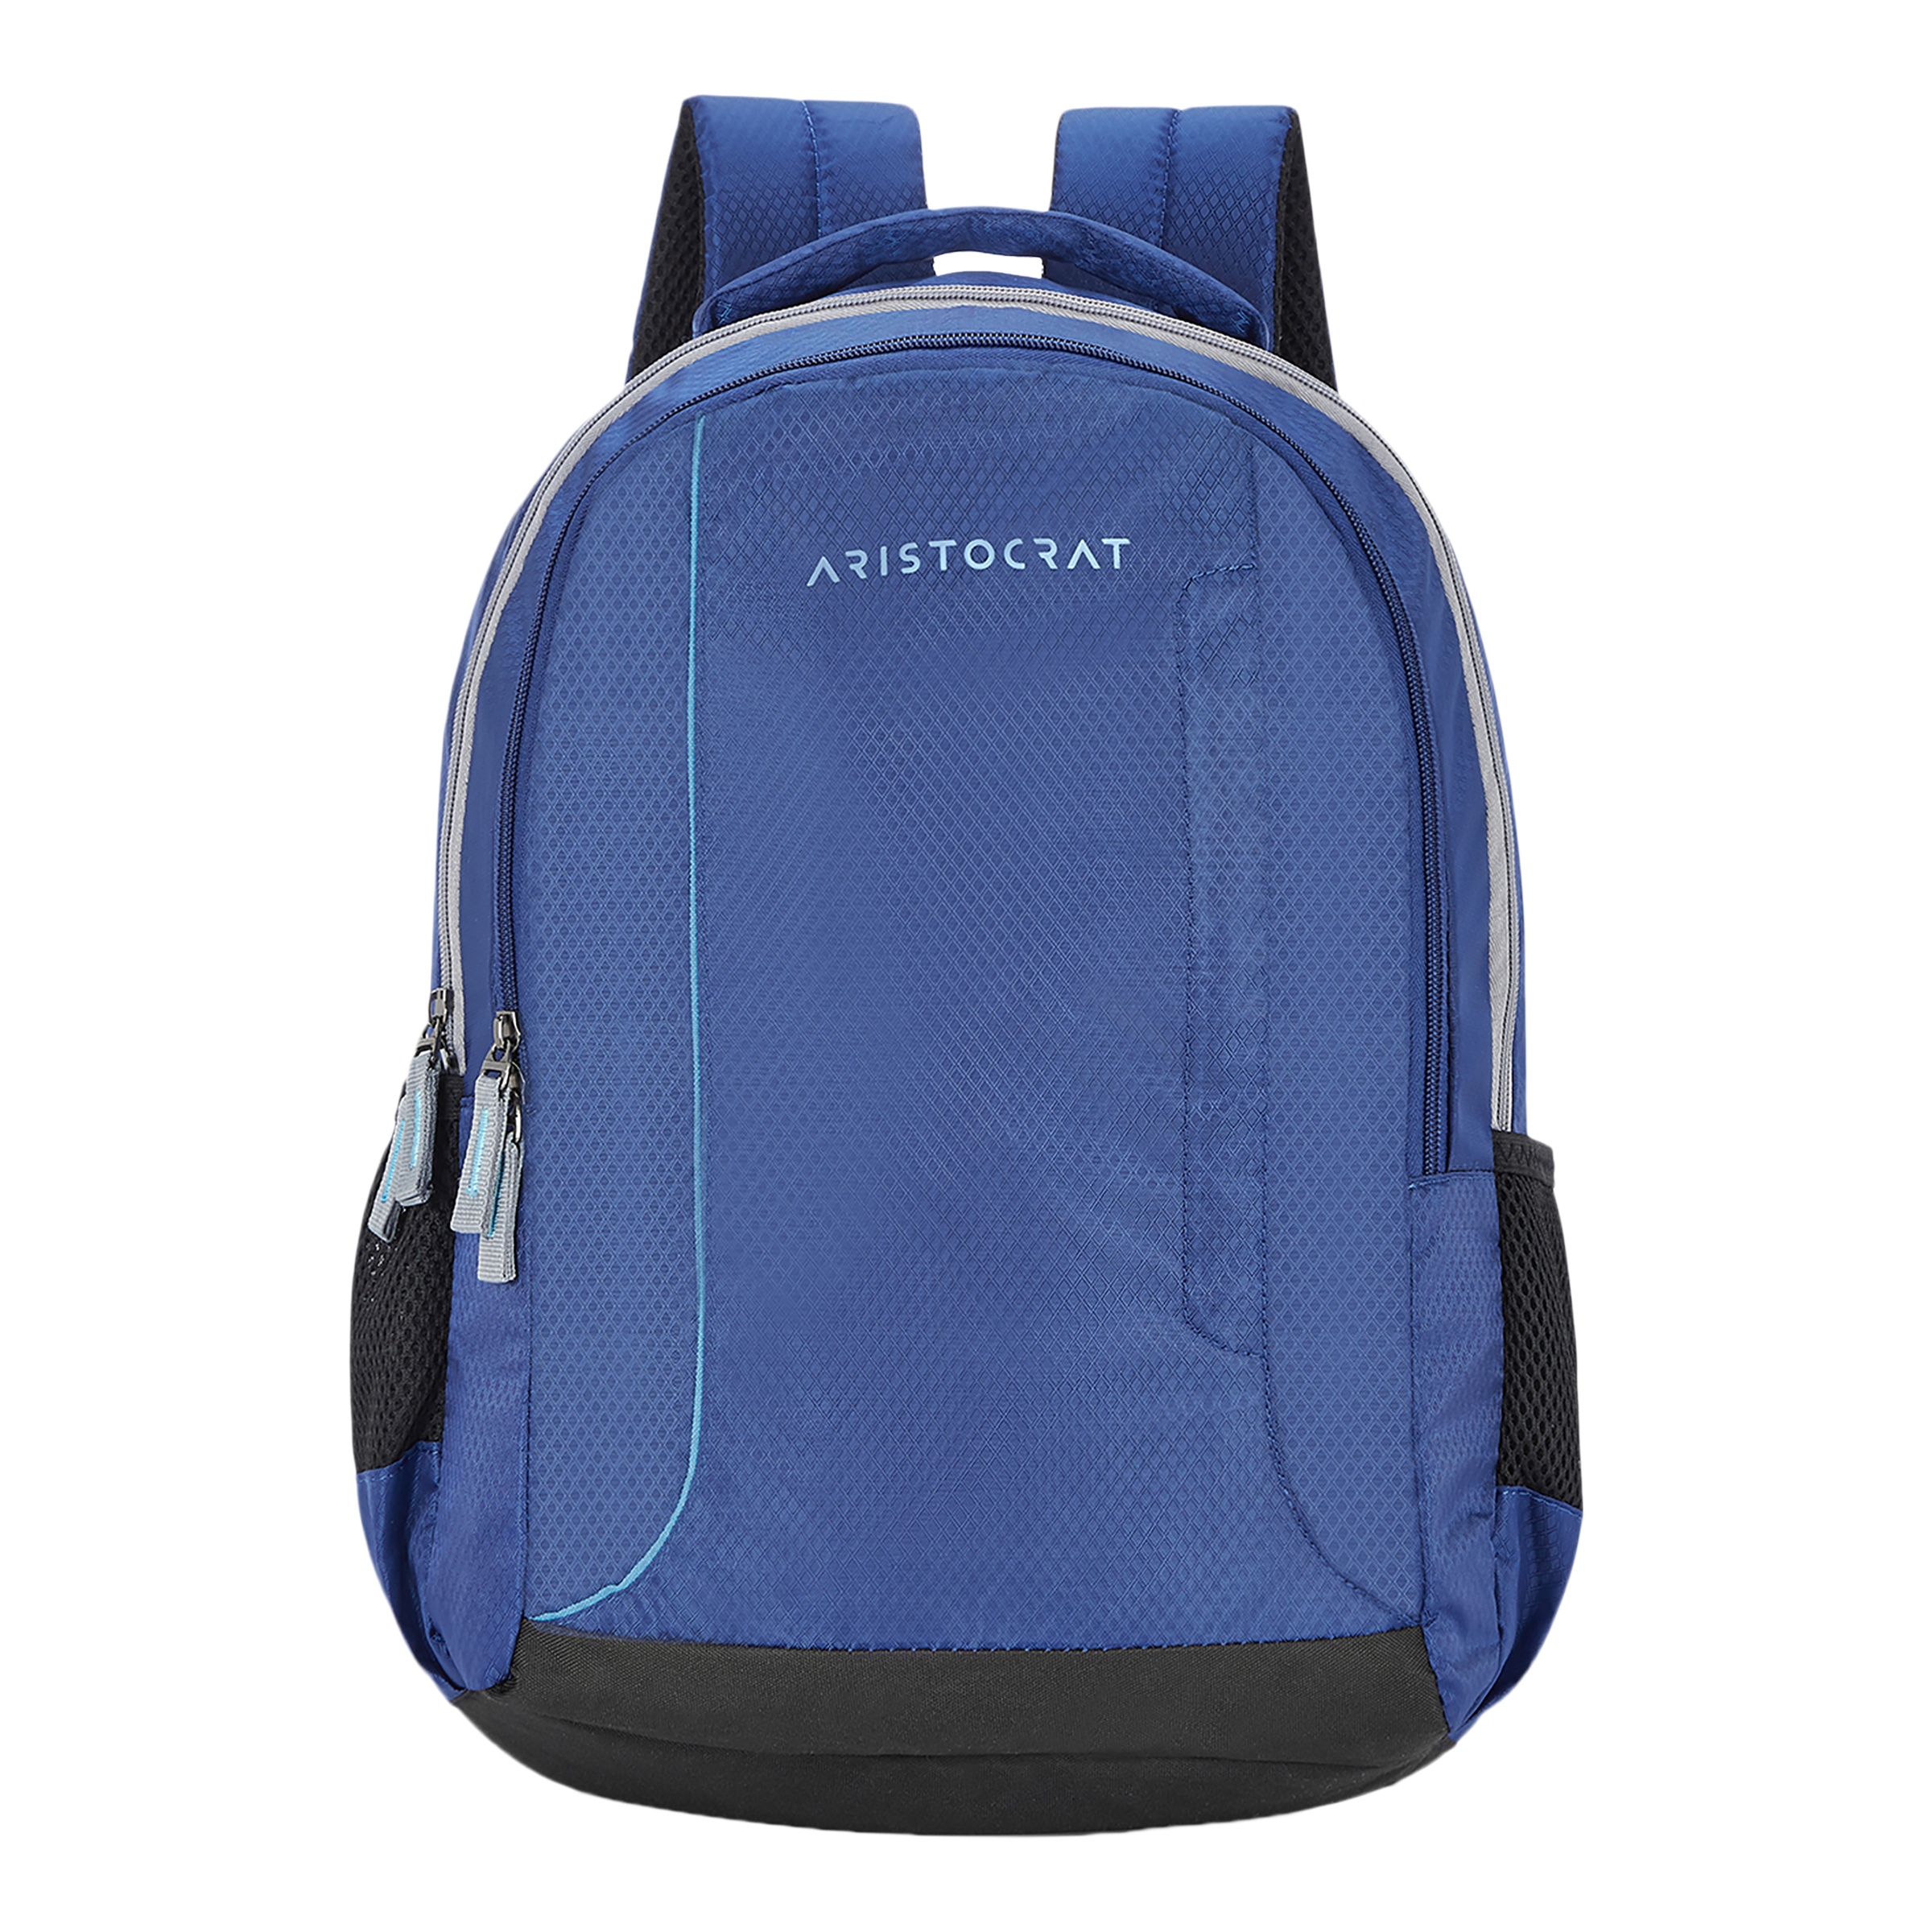 Croma Laptop Backpack in Phagwara - Dealers, Manufacturers & Suppliers -  Justdial